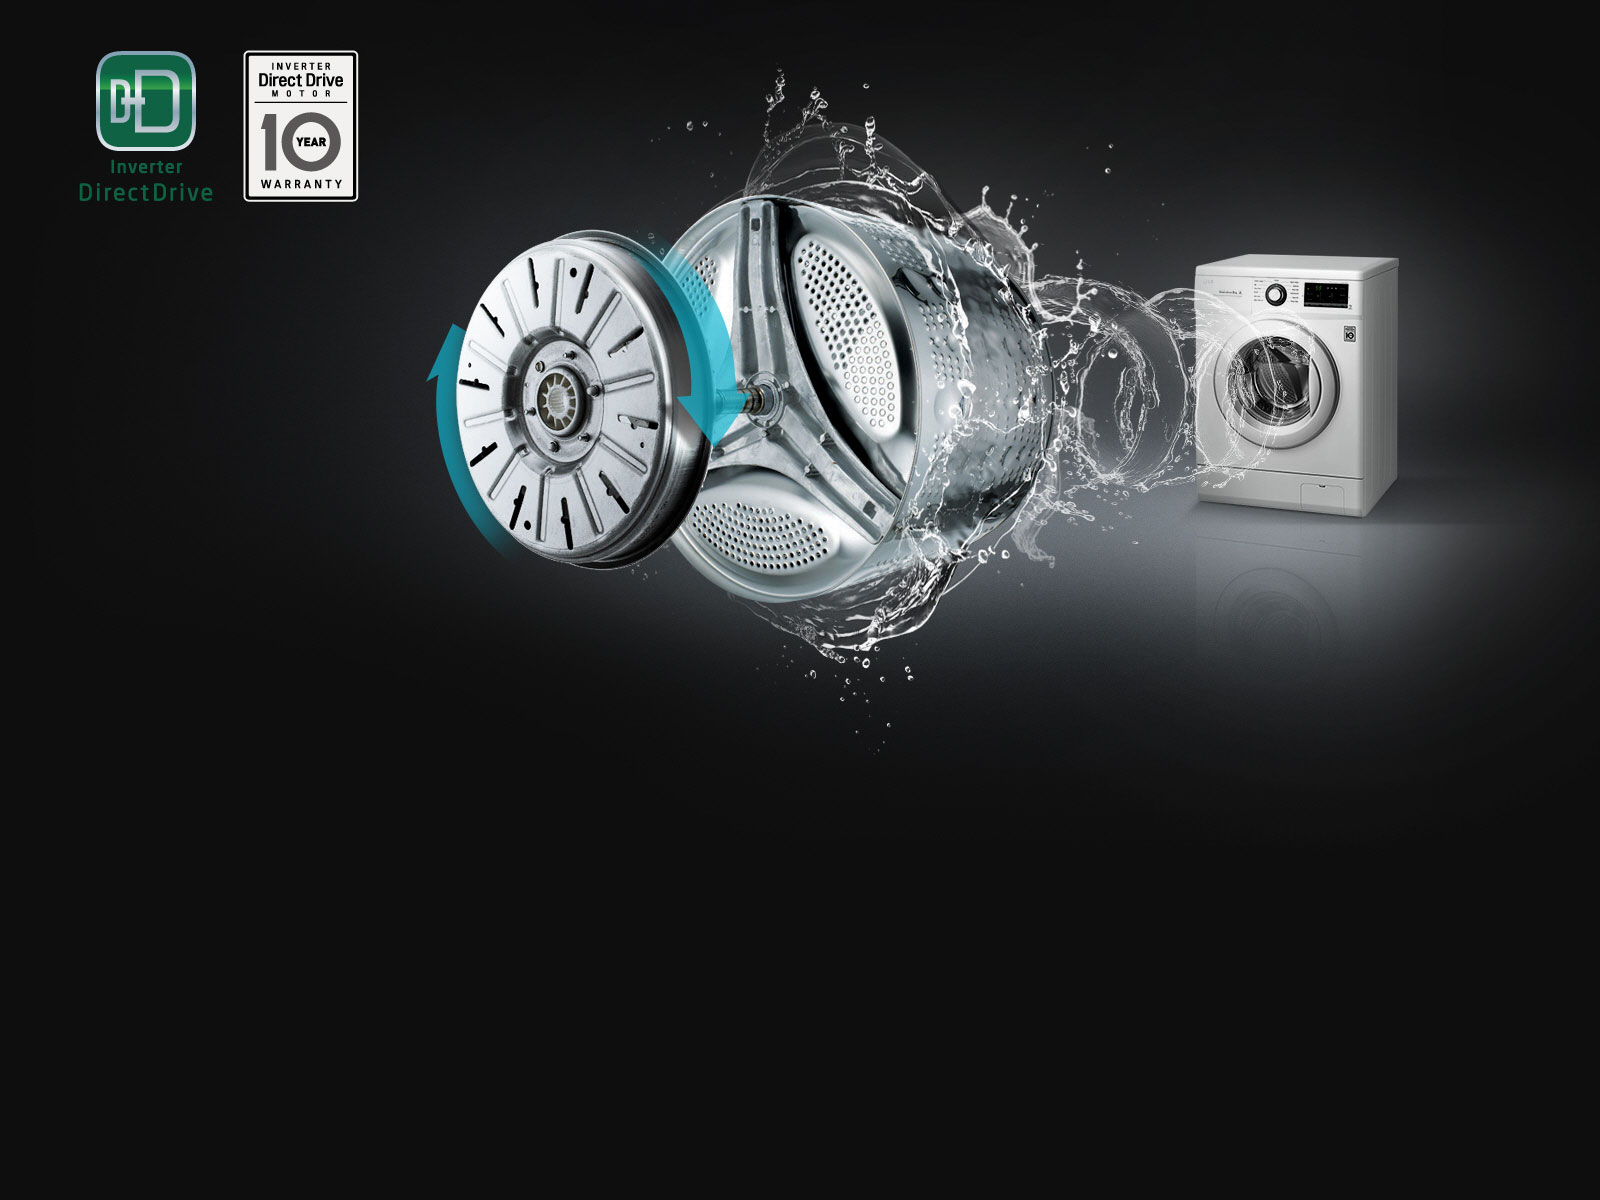 Inverter Direct Drive Technology for Powerful Washing and Less Noise